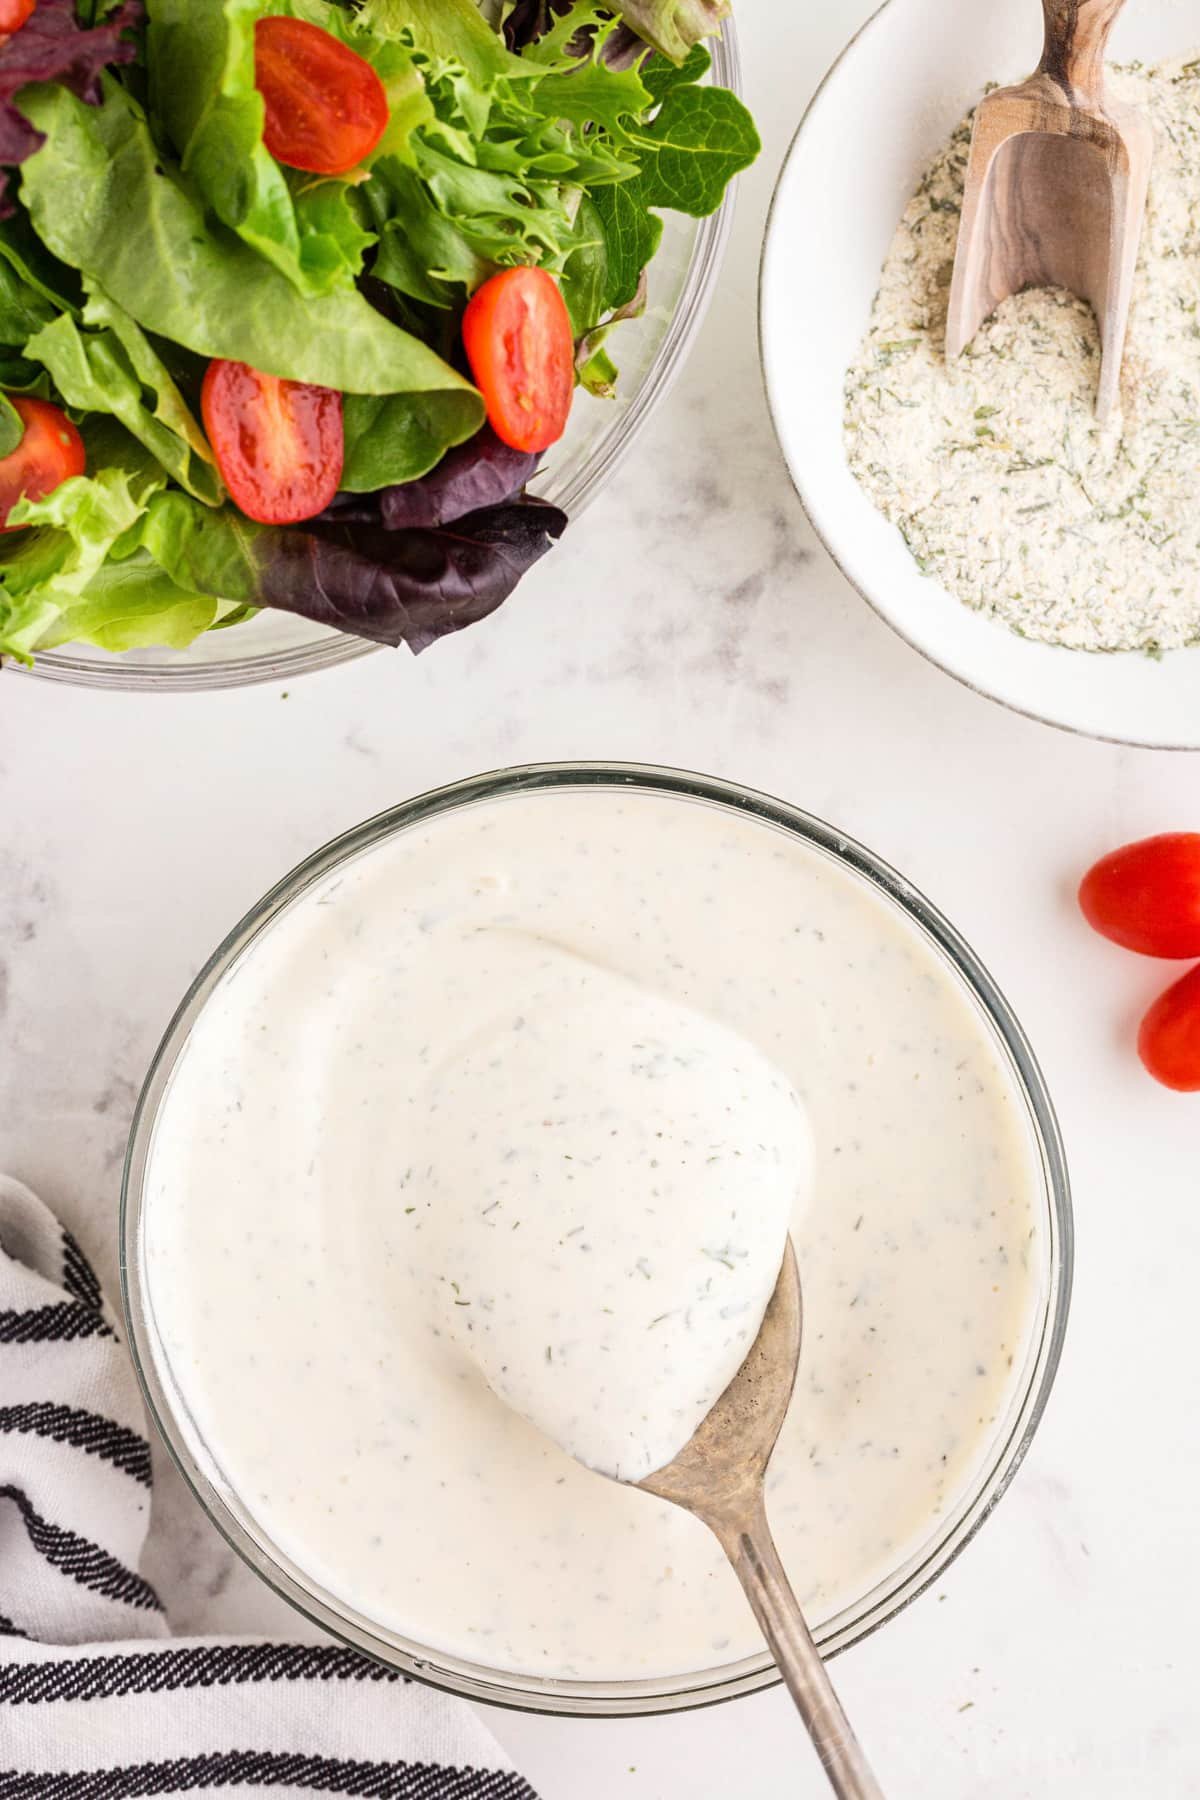 A bowl of Hidden Valley Ranch Dressing Recipe with a spoon inserted next to ranch seasoning and a salad.